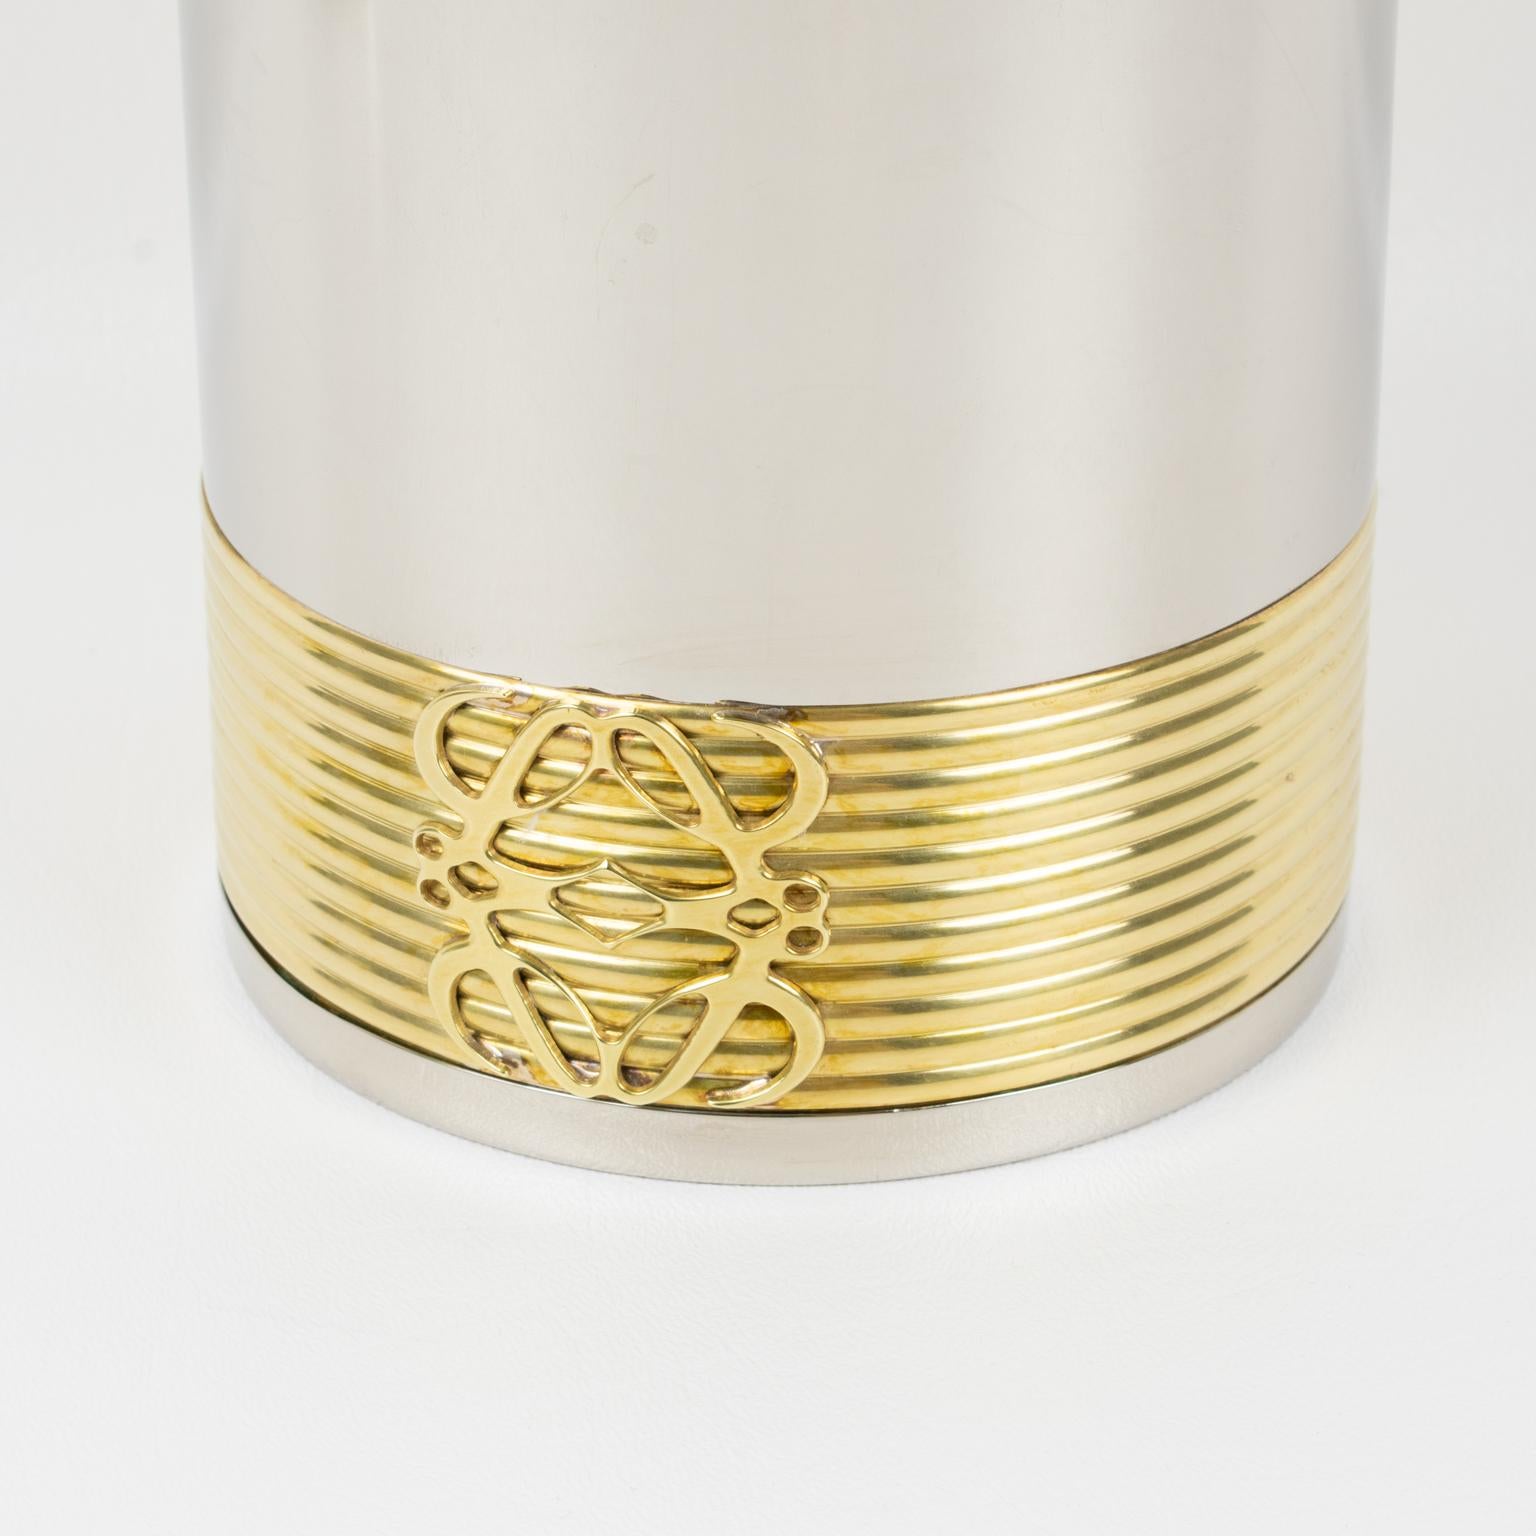 Loewe Spain Chrome and Gilt Metal Thermos Insulated Decanter For Sale 1